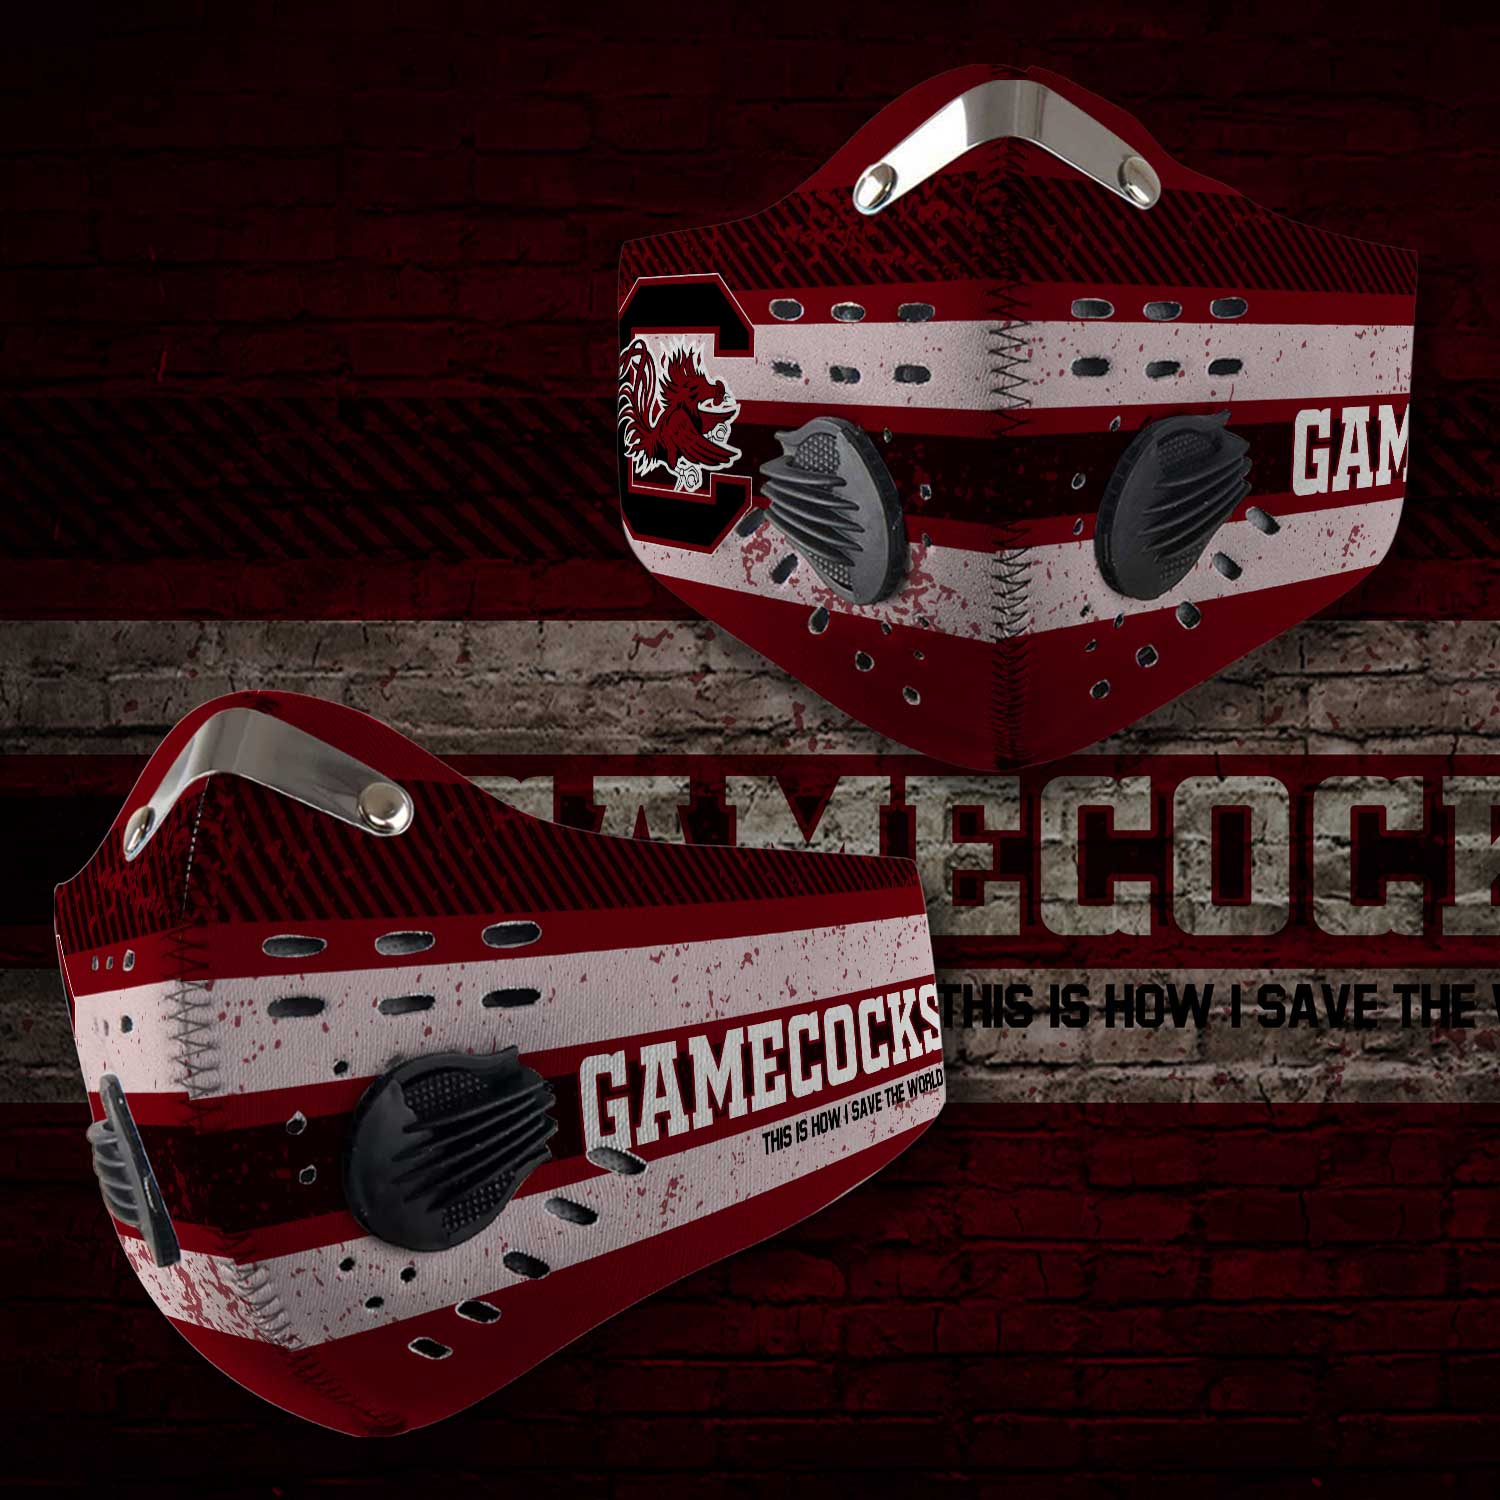 South carolina gamecocks this is how i save the world face mask